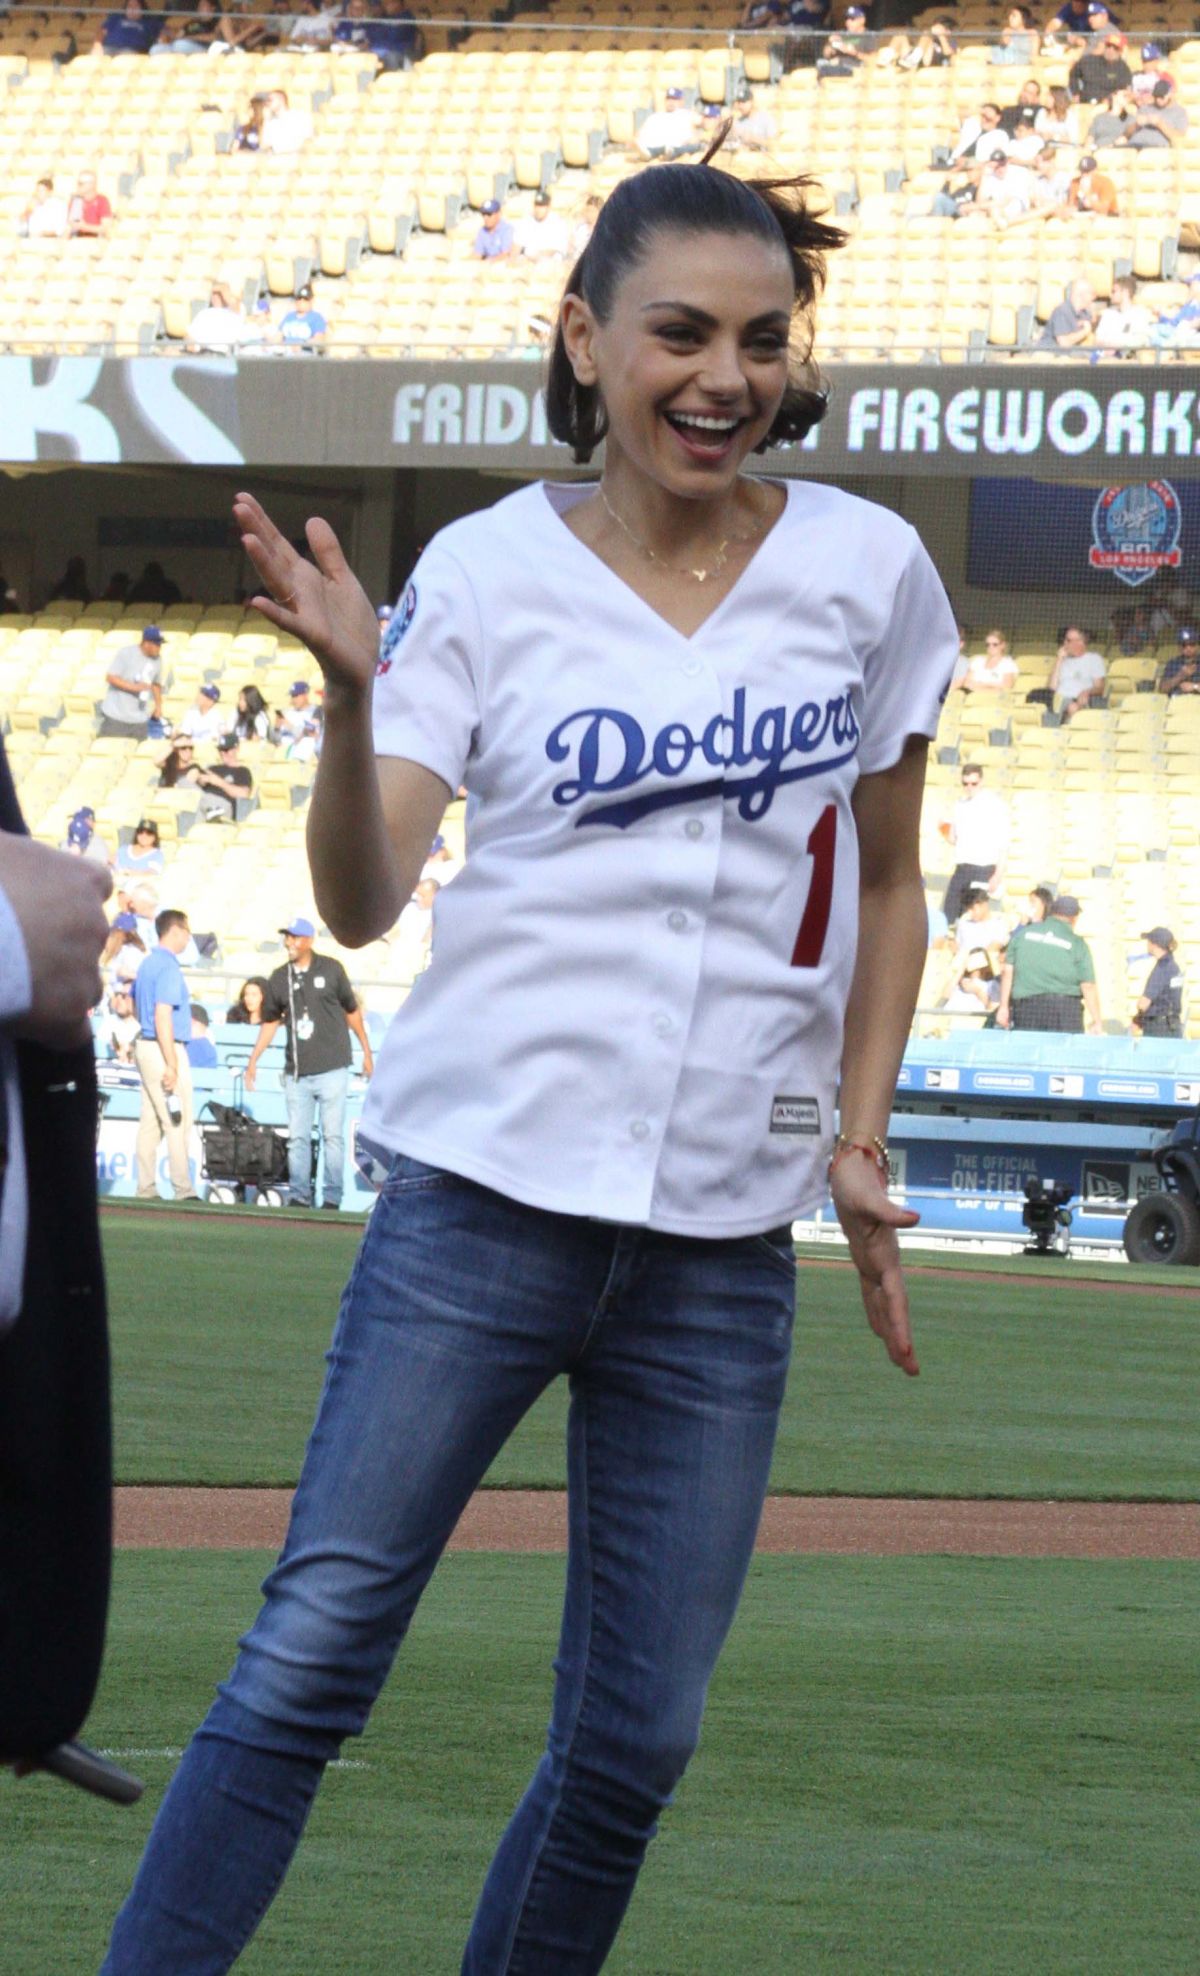 mila-kunis-throws-out-first-pitch-at-colorado-rockies-vs-los-angeles-dodgers-game-06-29-2018-3.jpg